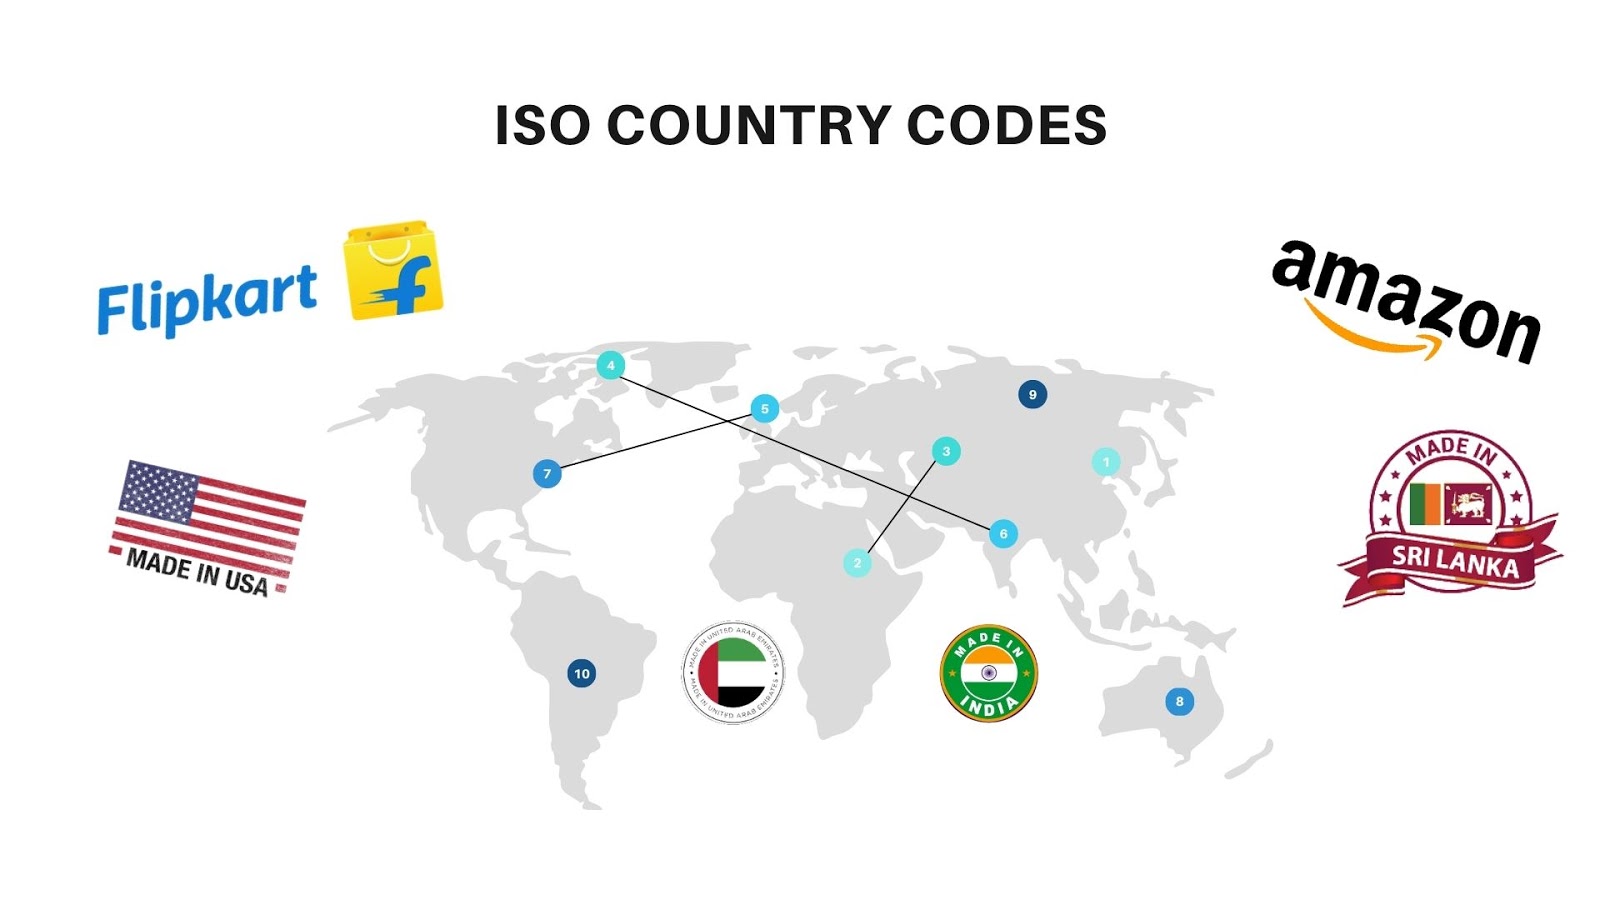 ISO Country Codes, country list, iso country codes, +2 country code, list of countries, countries with 2 digit codes, country ISO 3166-1 codes, country names, world code, europe code, usa code, iso country, codes iso country, country code for usa, country iso codes, Complete list